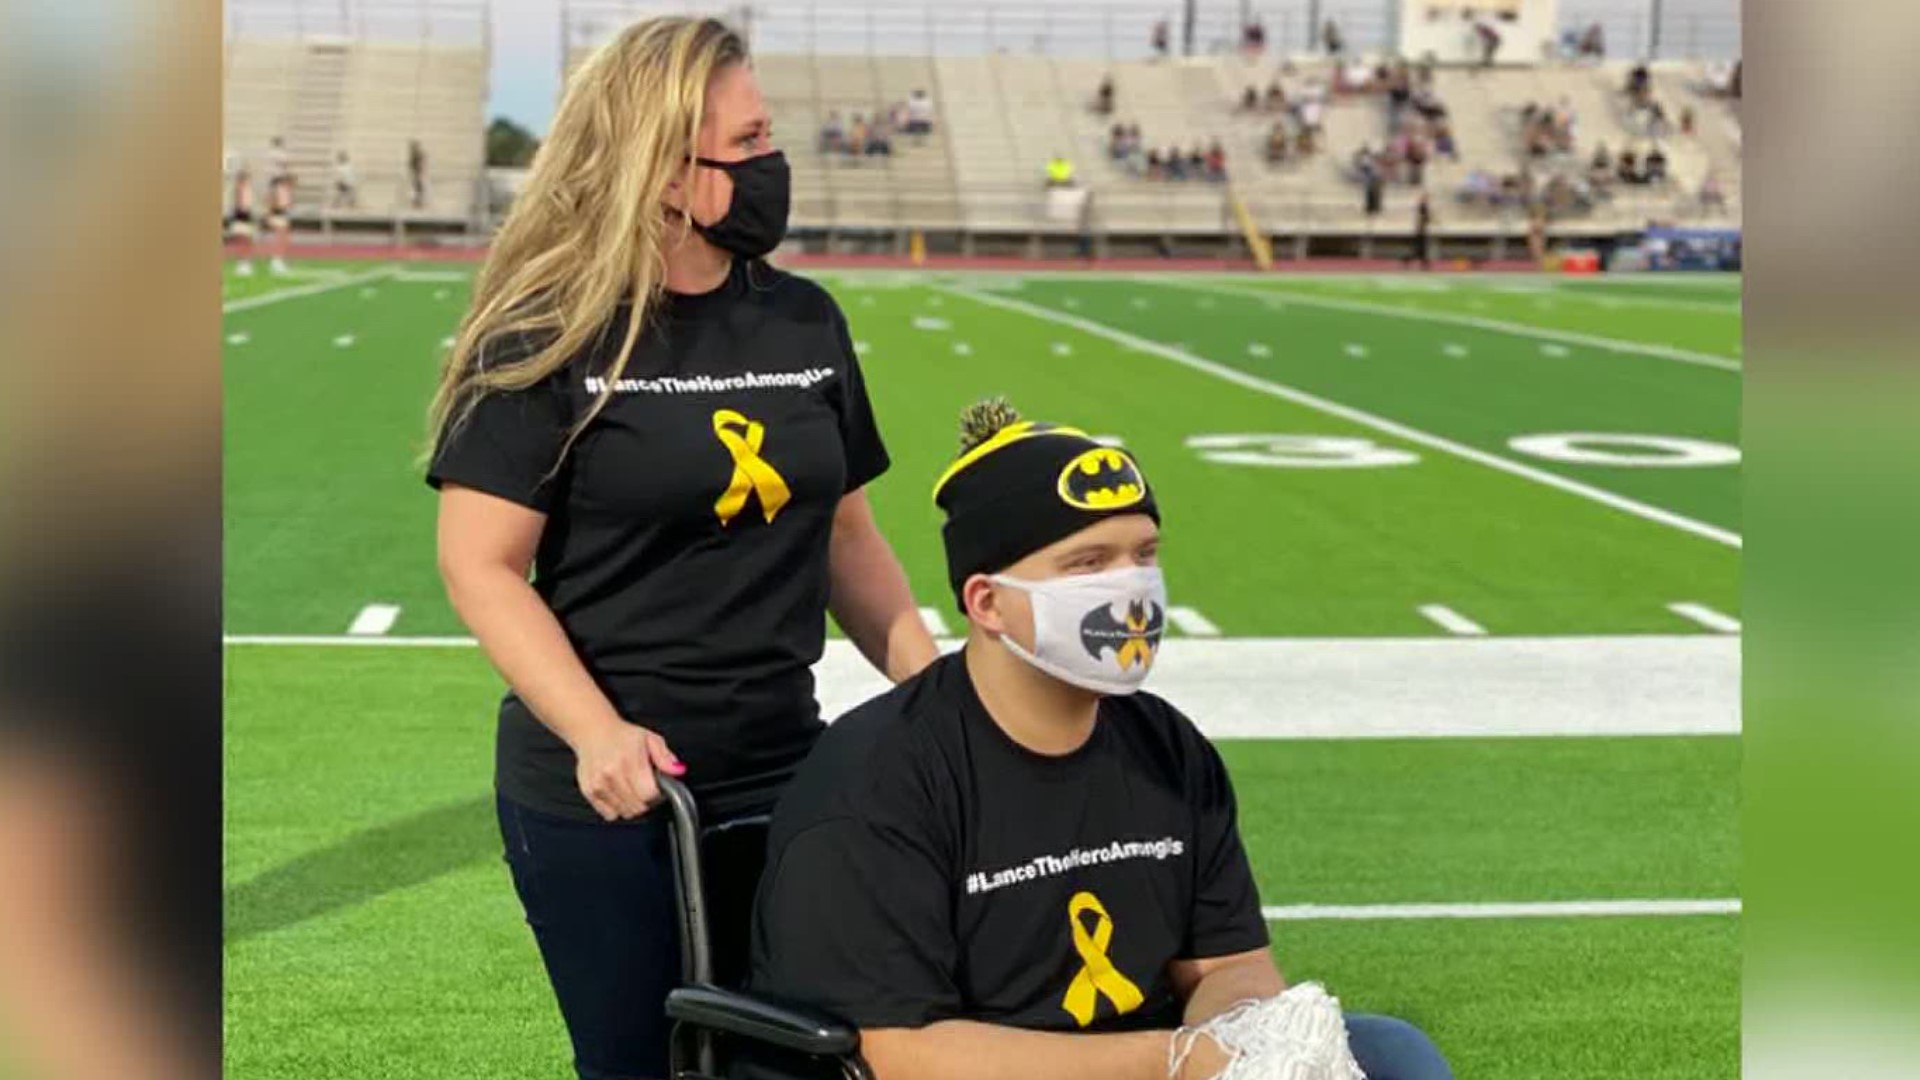 Lance Yarbrough and other children battling cancer were honored at the Ingleside Mustangs football game.